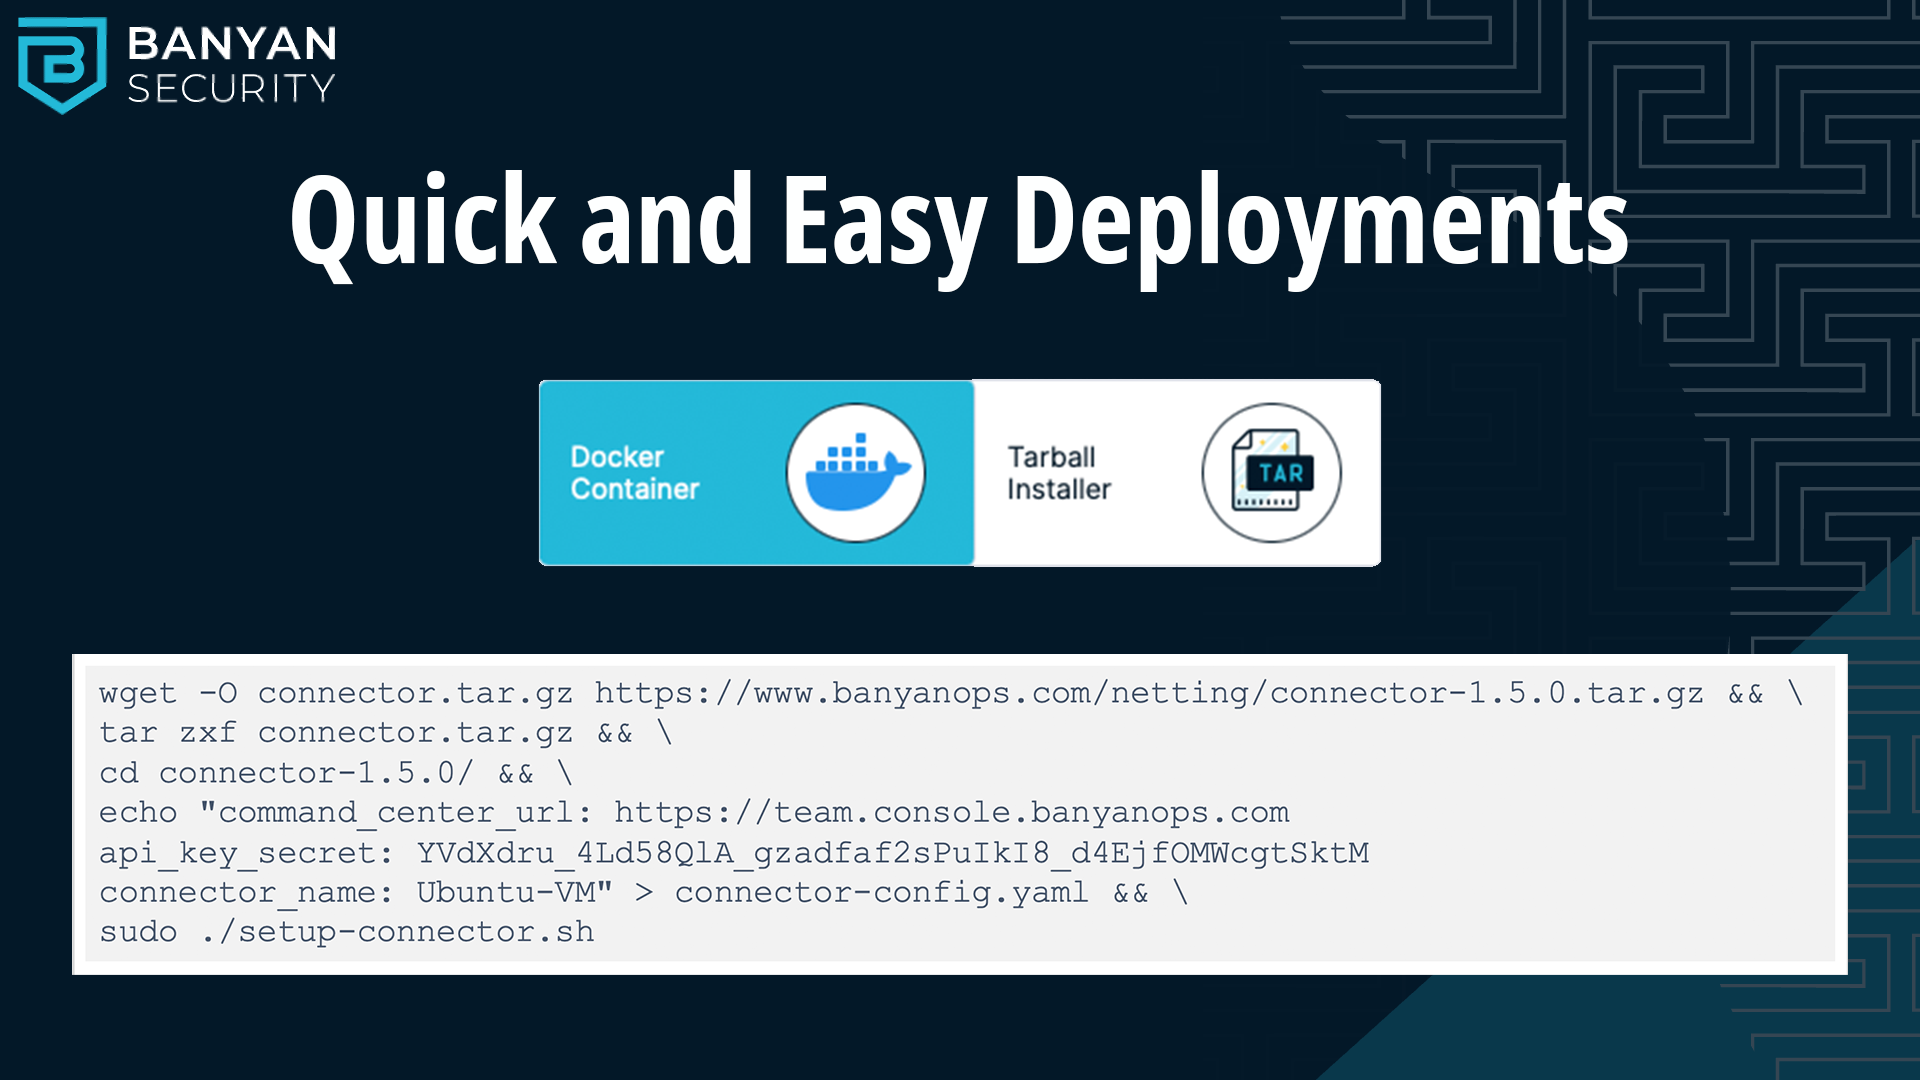 Deploy Banyan’s Flexible Edge in minutes using connectors or Terraform. Configuration is a breeze with simple workflows and wizards.